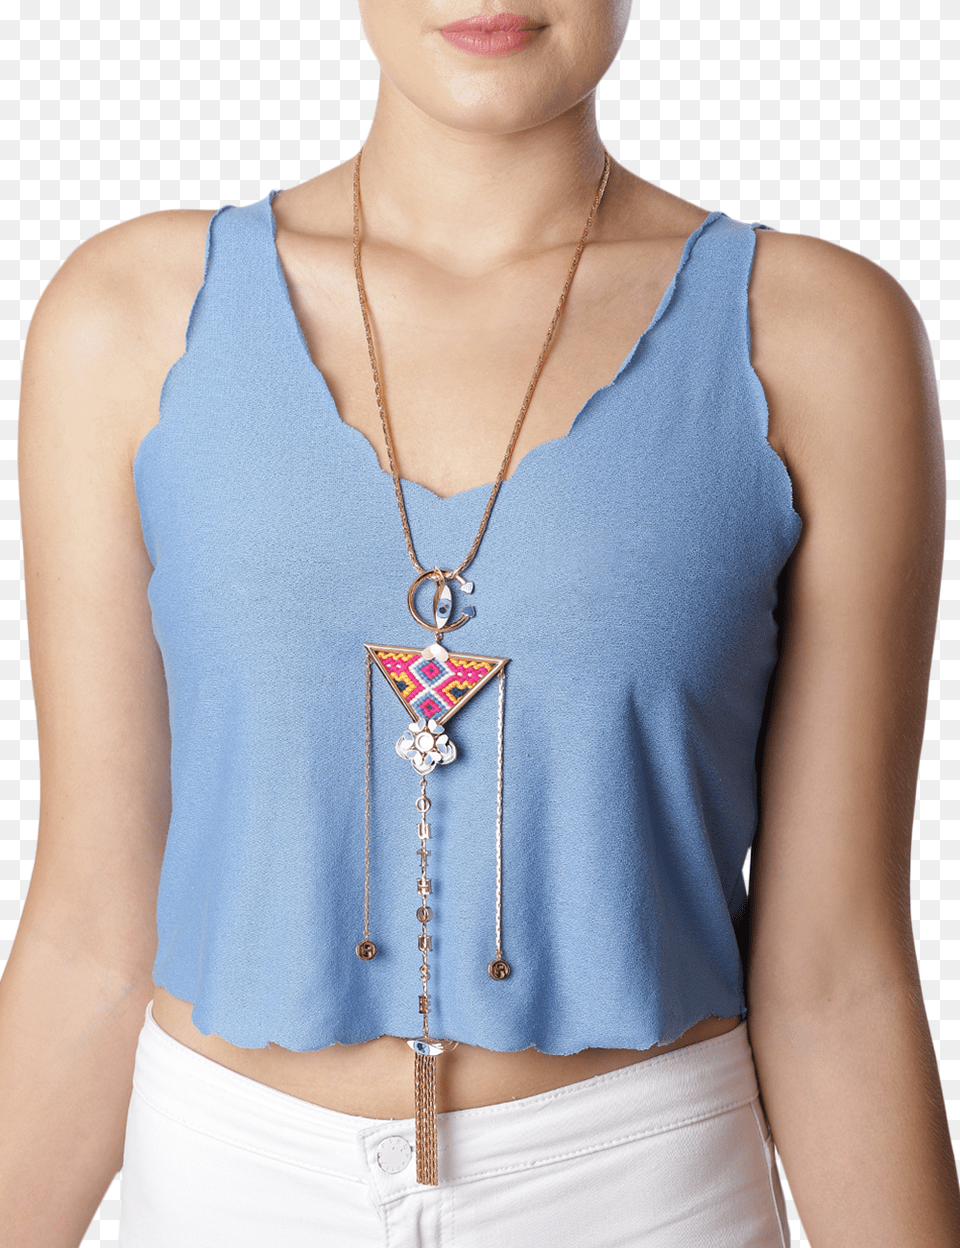 Aztec Pyramid, Accessories, Jewelry, Necklace, Pendant Png Image